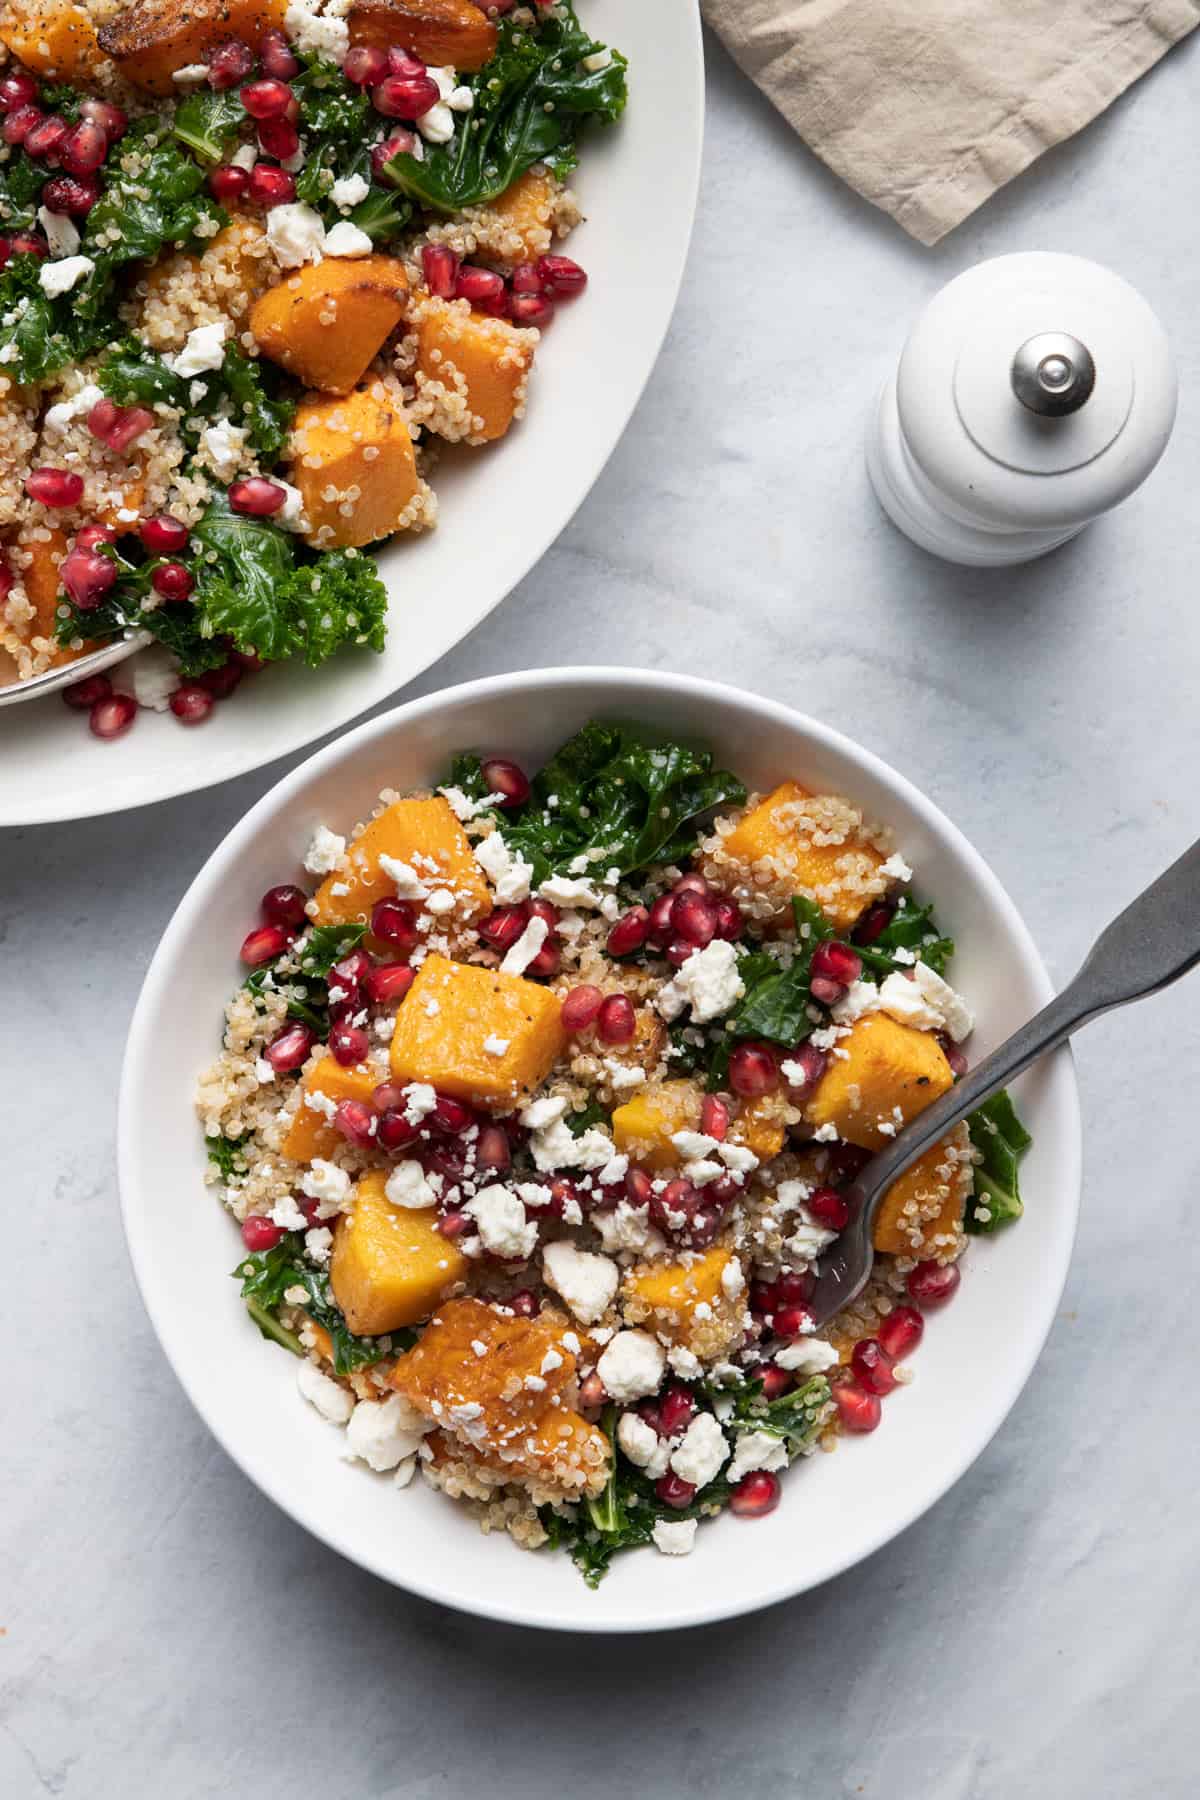 One small bowl of butternut squash quinoa salad served with larger bowl next to it